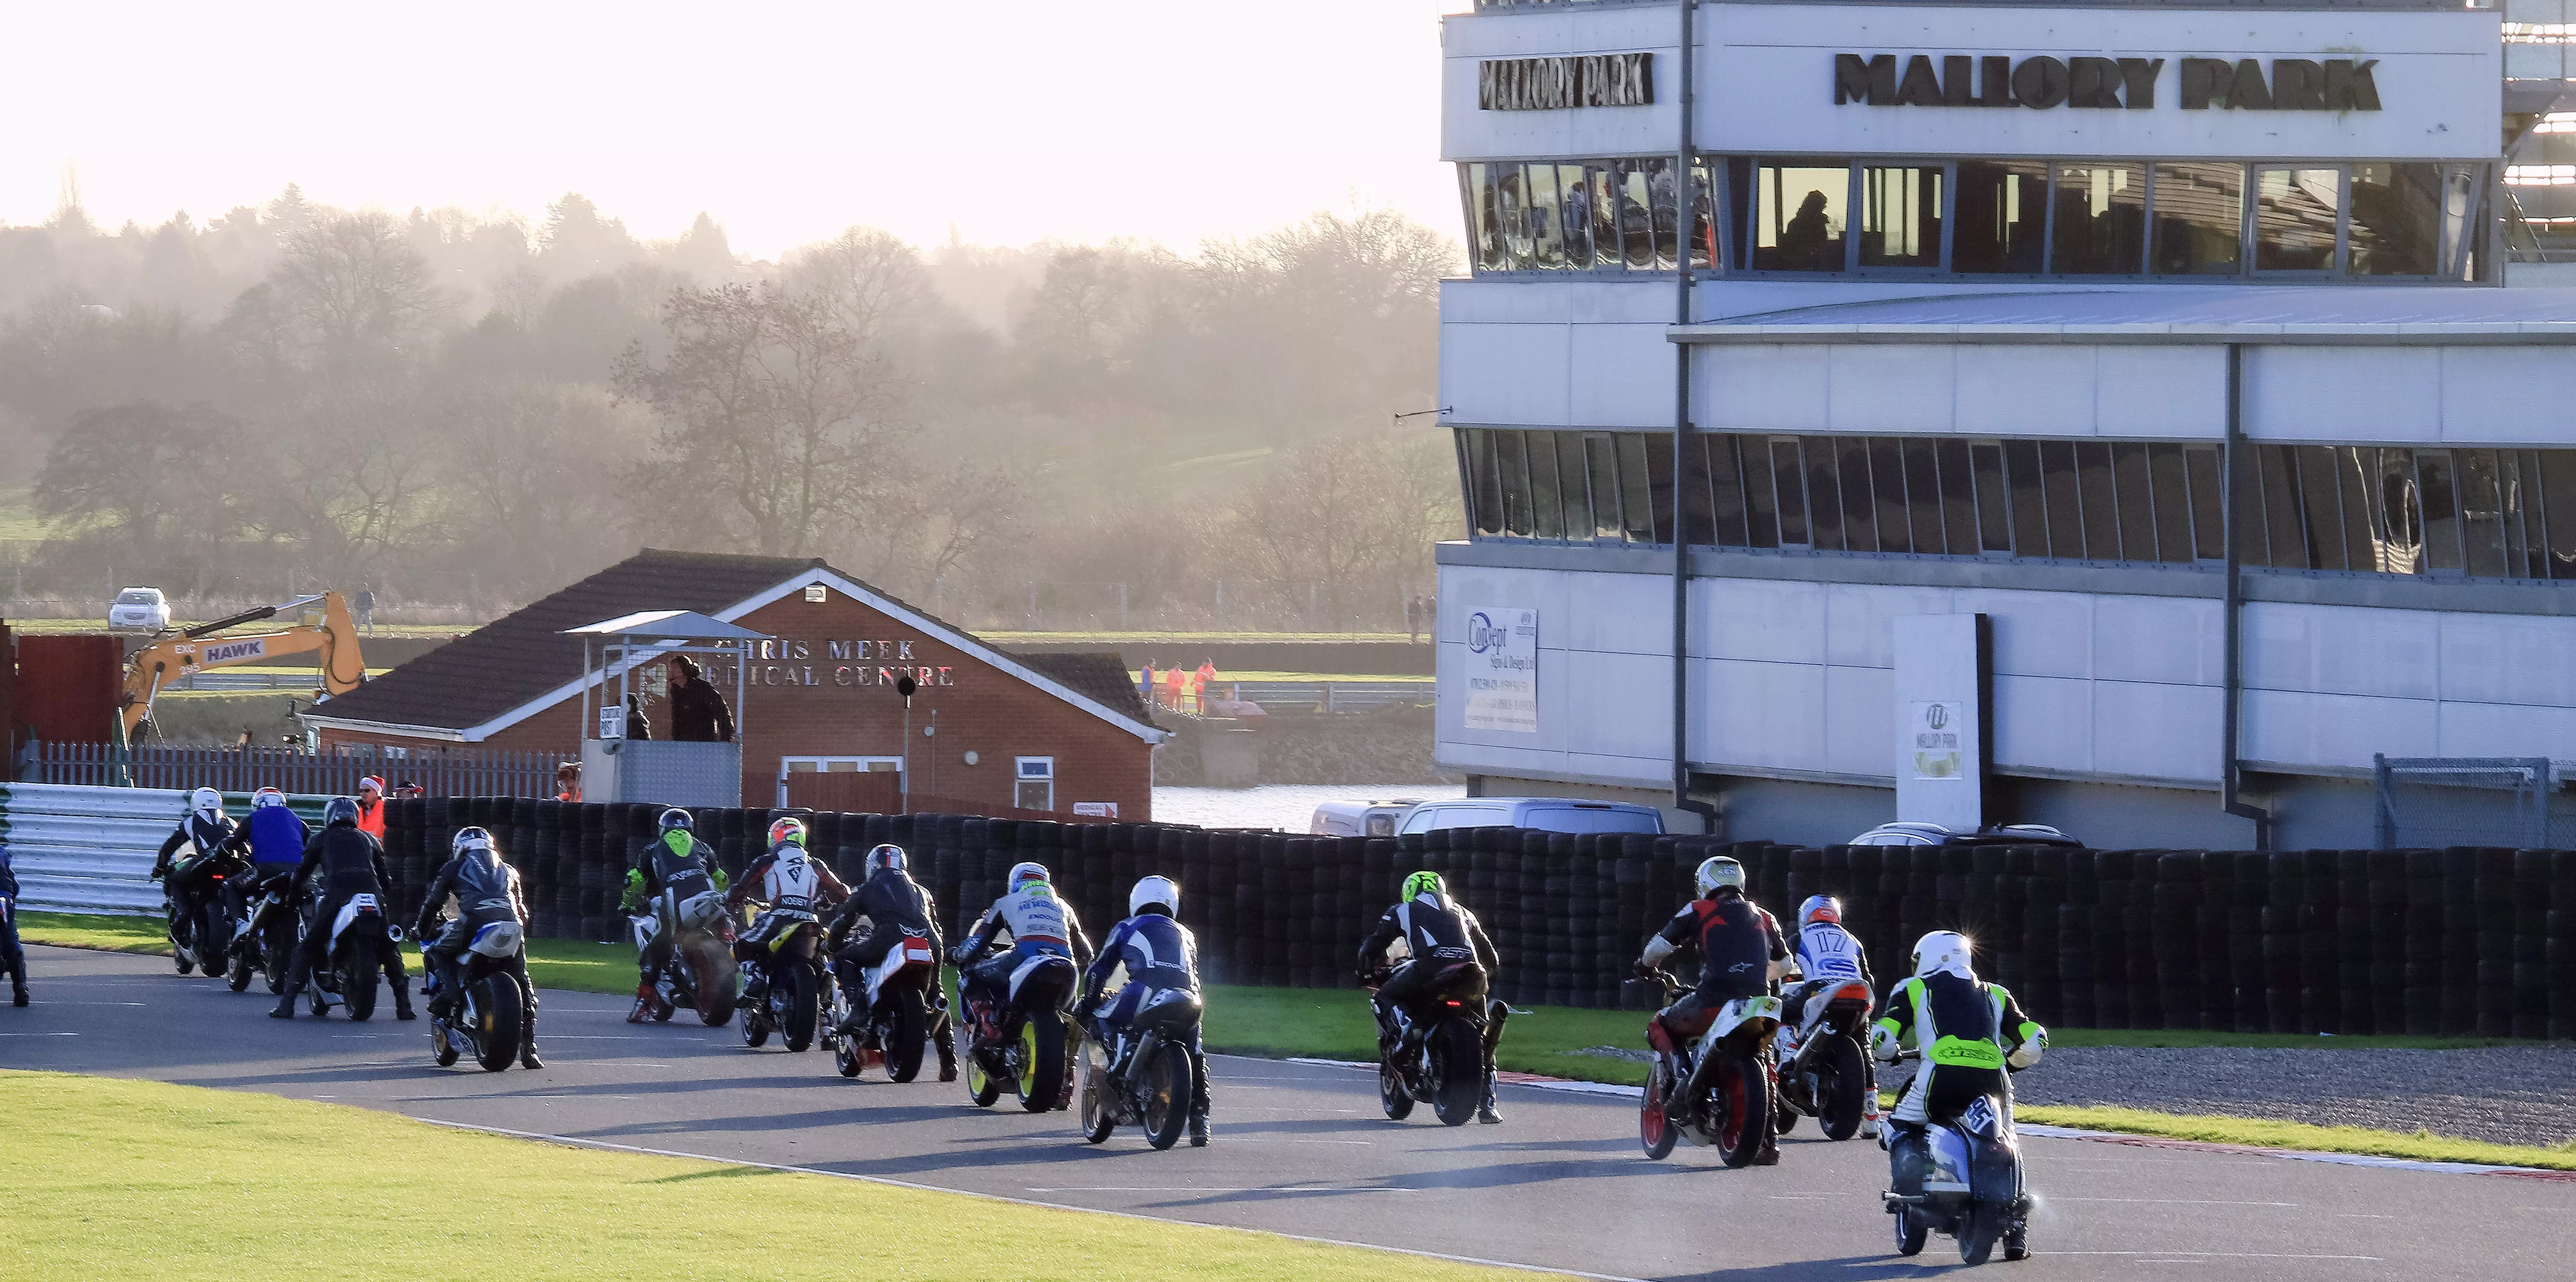 Mallory Park Racing Circuit in United Kingdom, Europe | Racing,Motorcycles - Rated 4.5